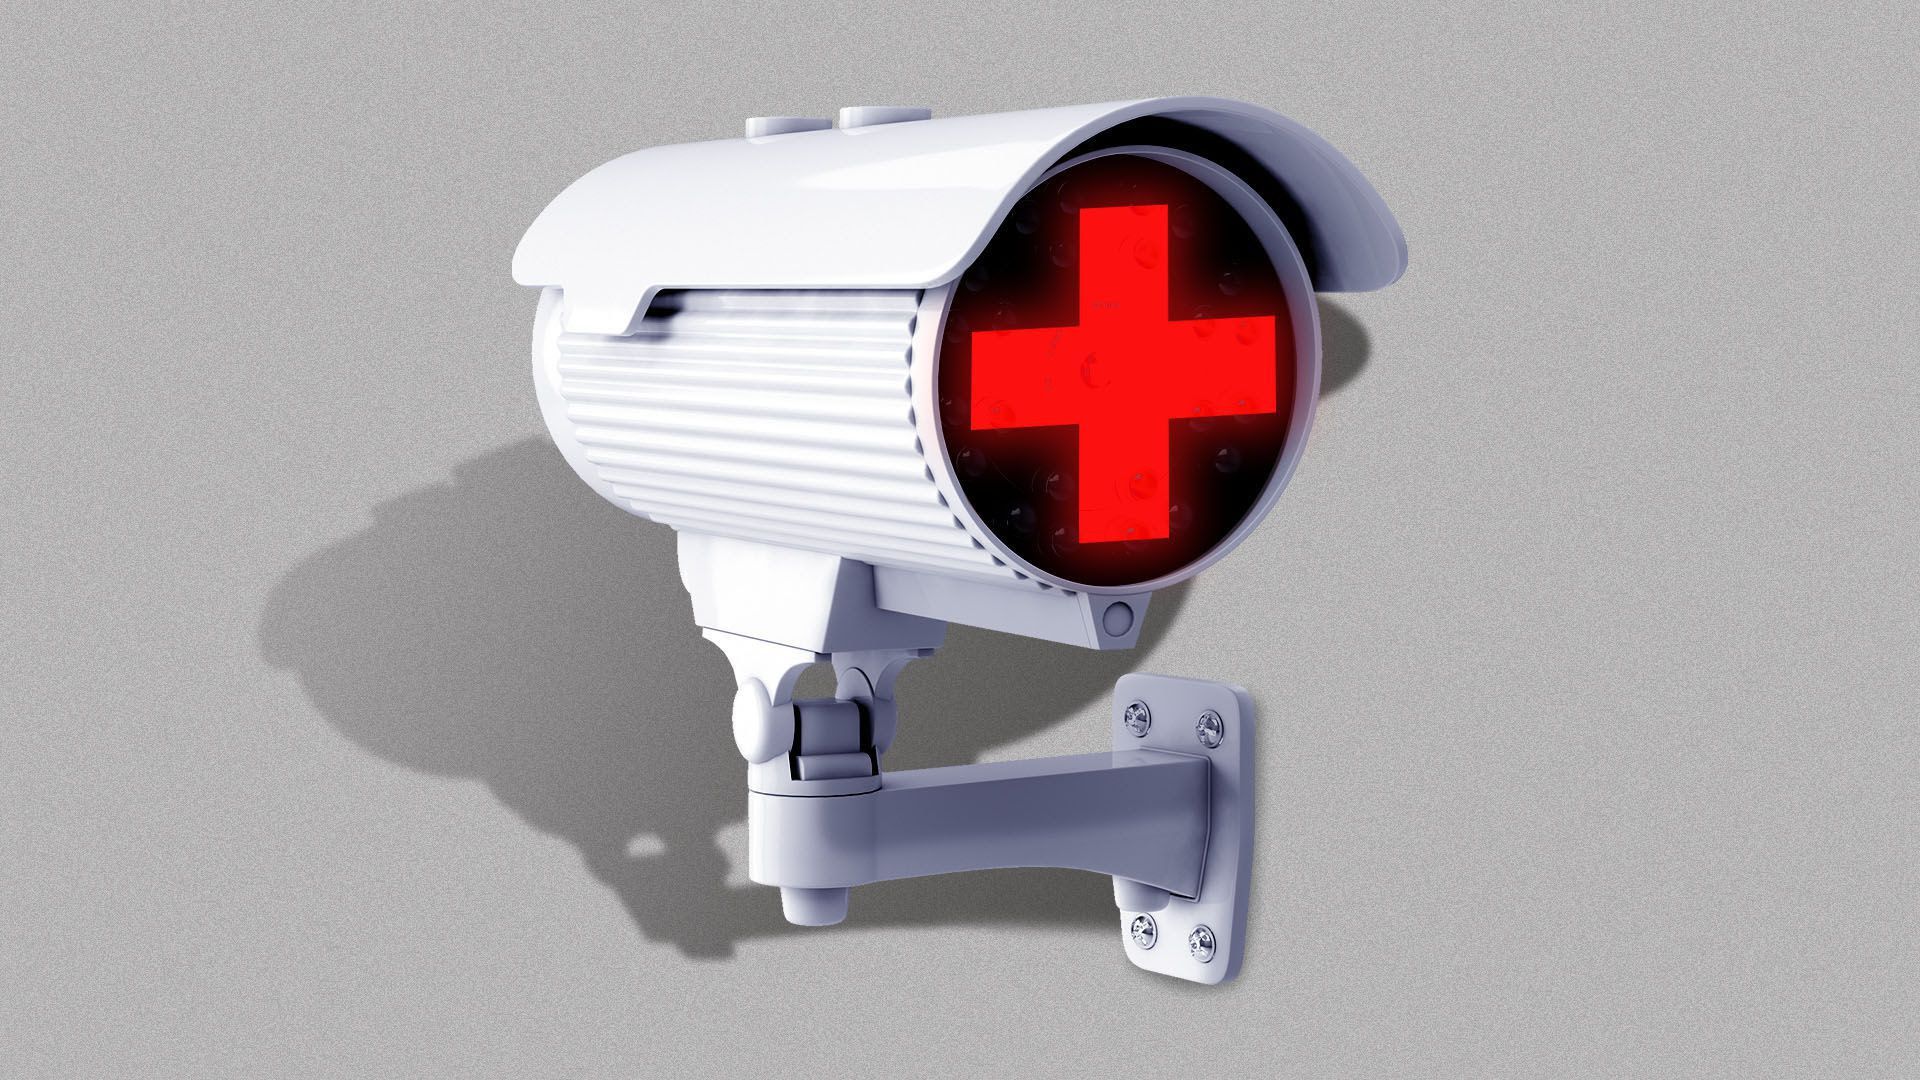 An illustration of a camera with a red cross over the lens